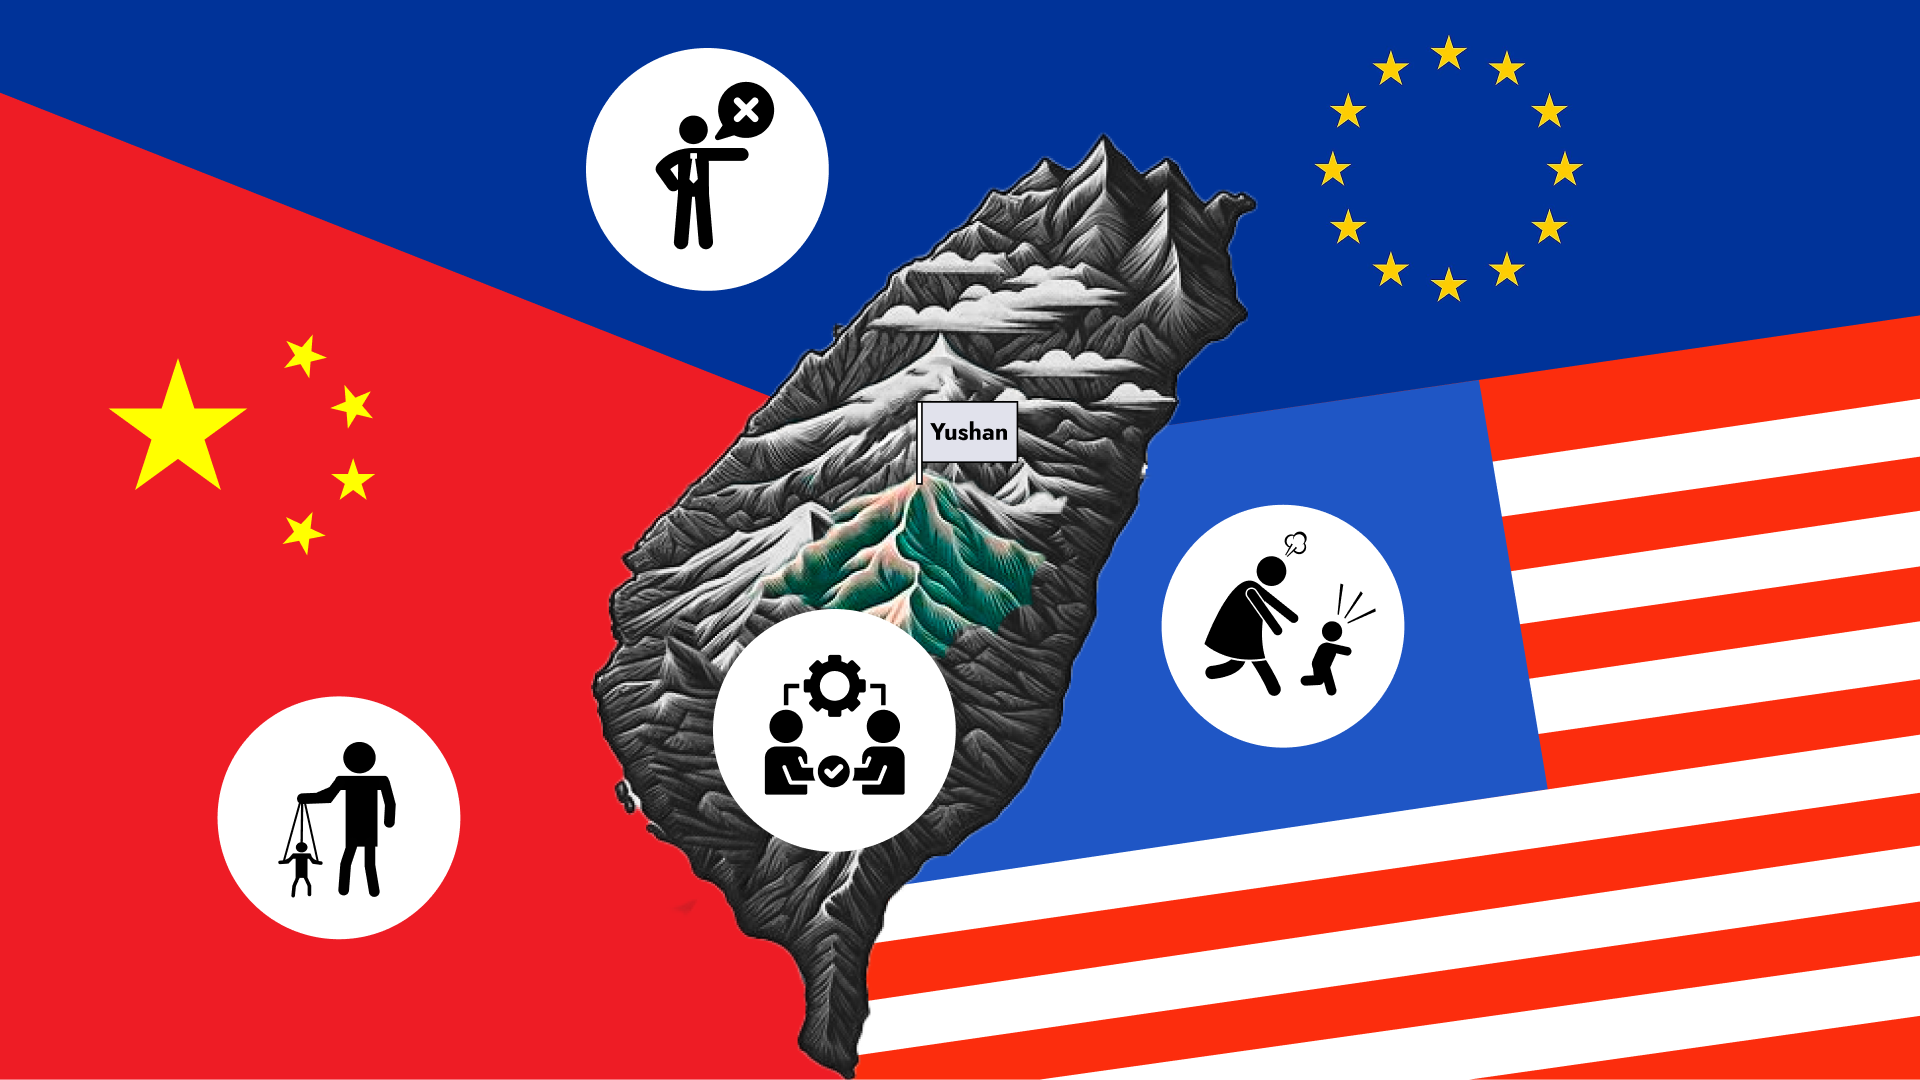 Figure shows reshaped flags of the People's Republic of China, the United States of America and the European Union as if they were continental shelves, intersecting at a central island of Taiwan, topped by Yushan.  The PRC is symbolized by a puppeteer, the US by a child running wild and Europe by a traffic cop.  Taiwan, in the center, is symbolized by people collaborating.